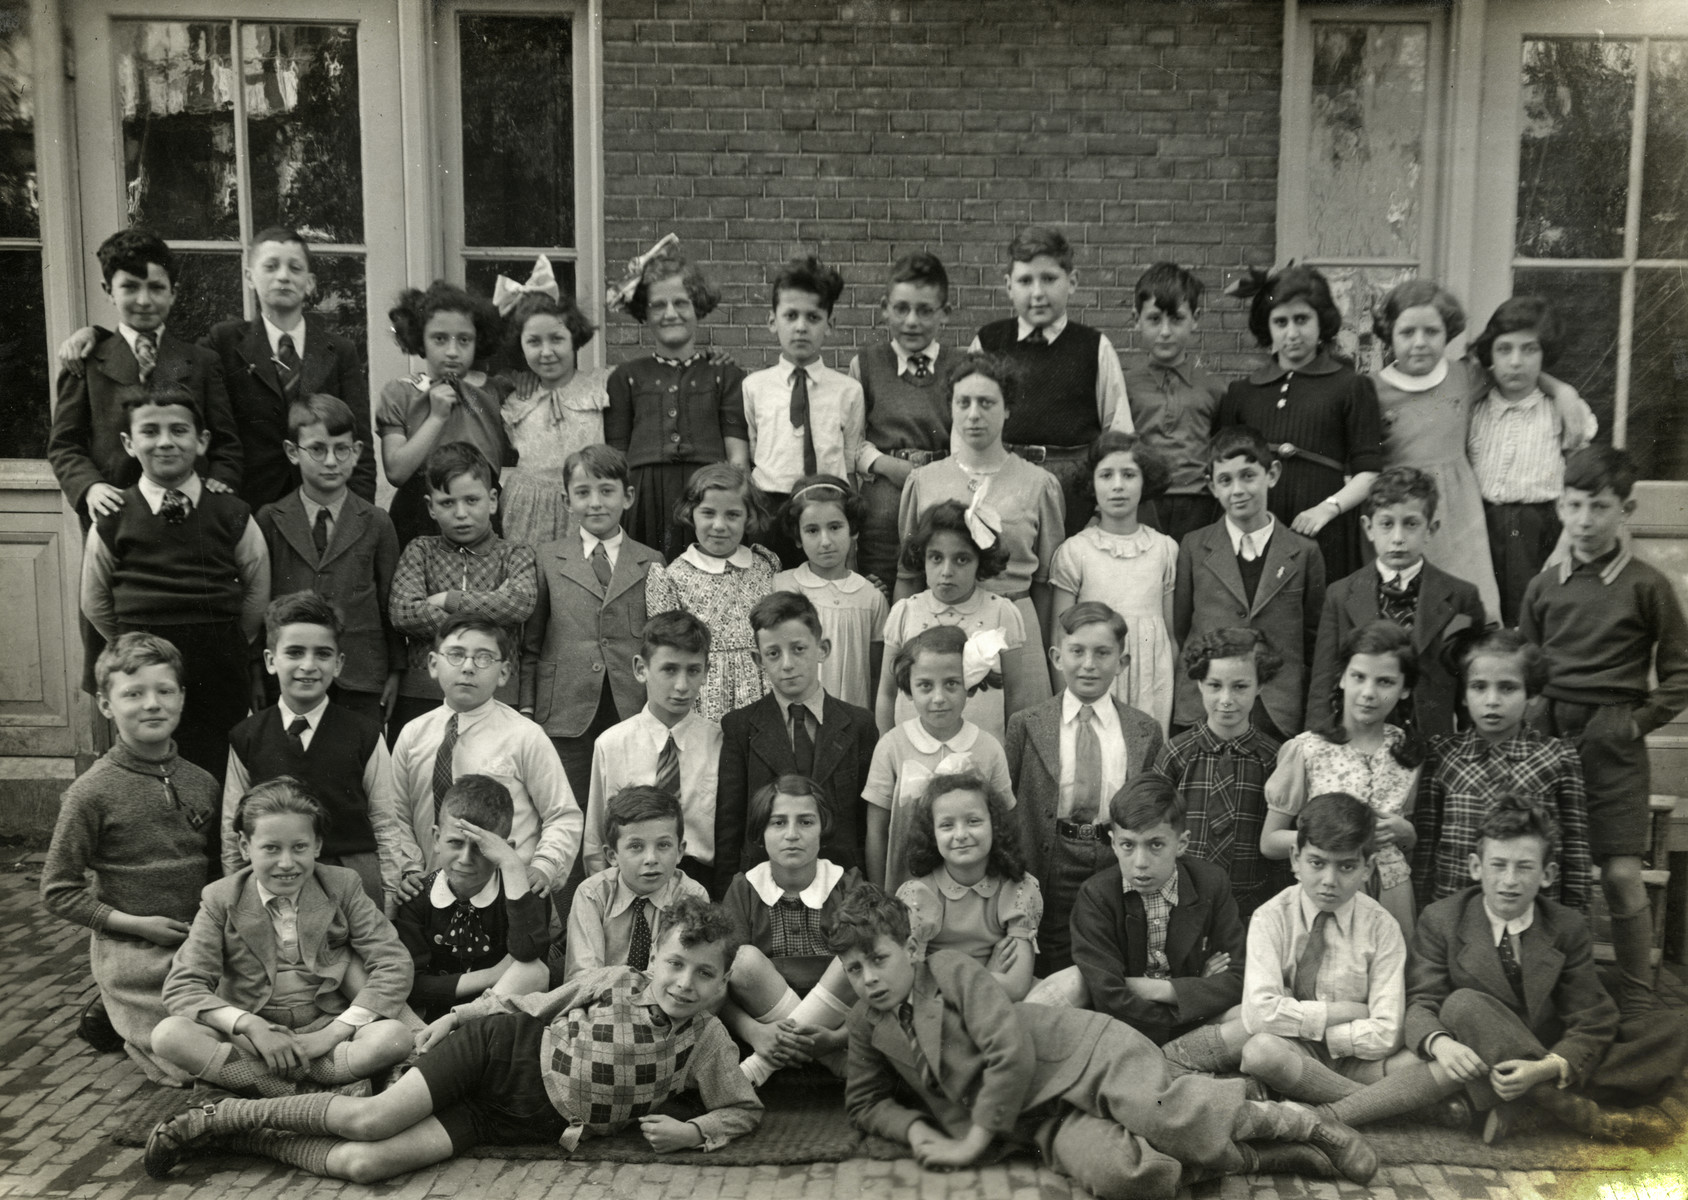 Group portrait of children in the 3rd grade of the Jewish elementary class in Amsterdam.

Among those pictured are Elchanan Tal (front row in a while shirt and tie), Hetty d'Ancona deLeeuwe (back row, second from right), and Judith Konijn (back row, far right).